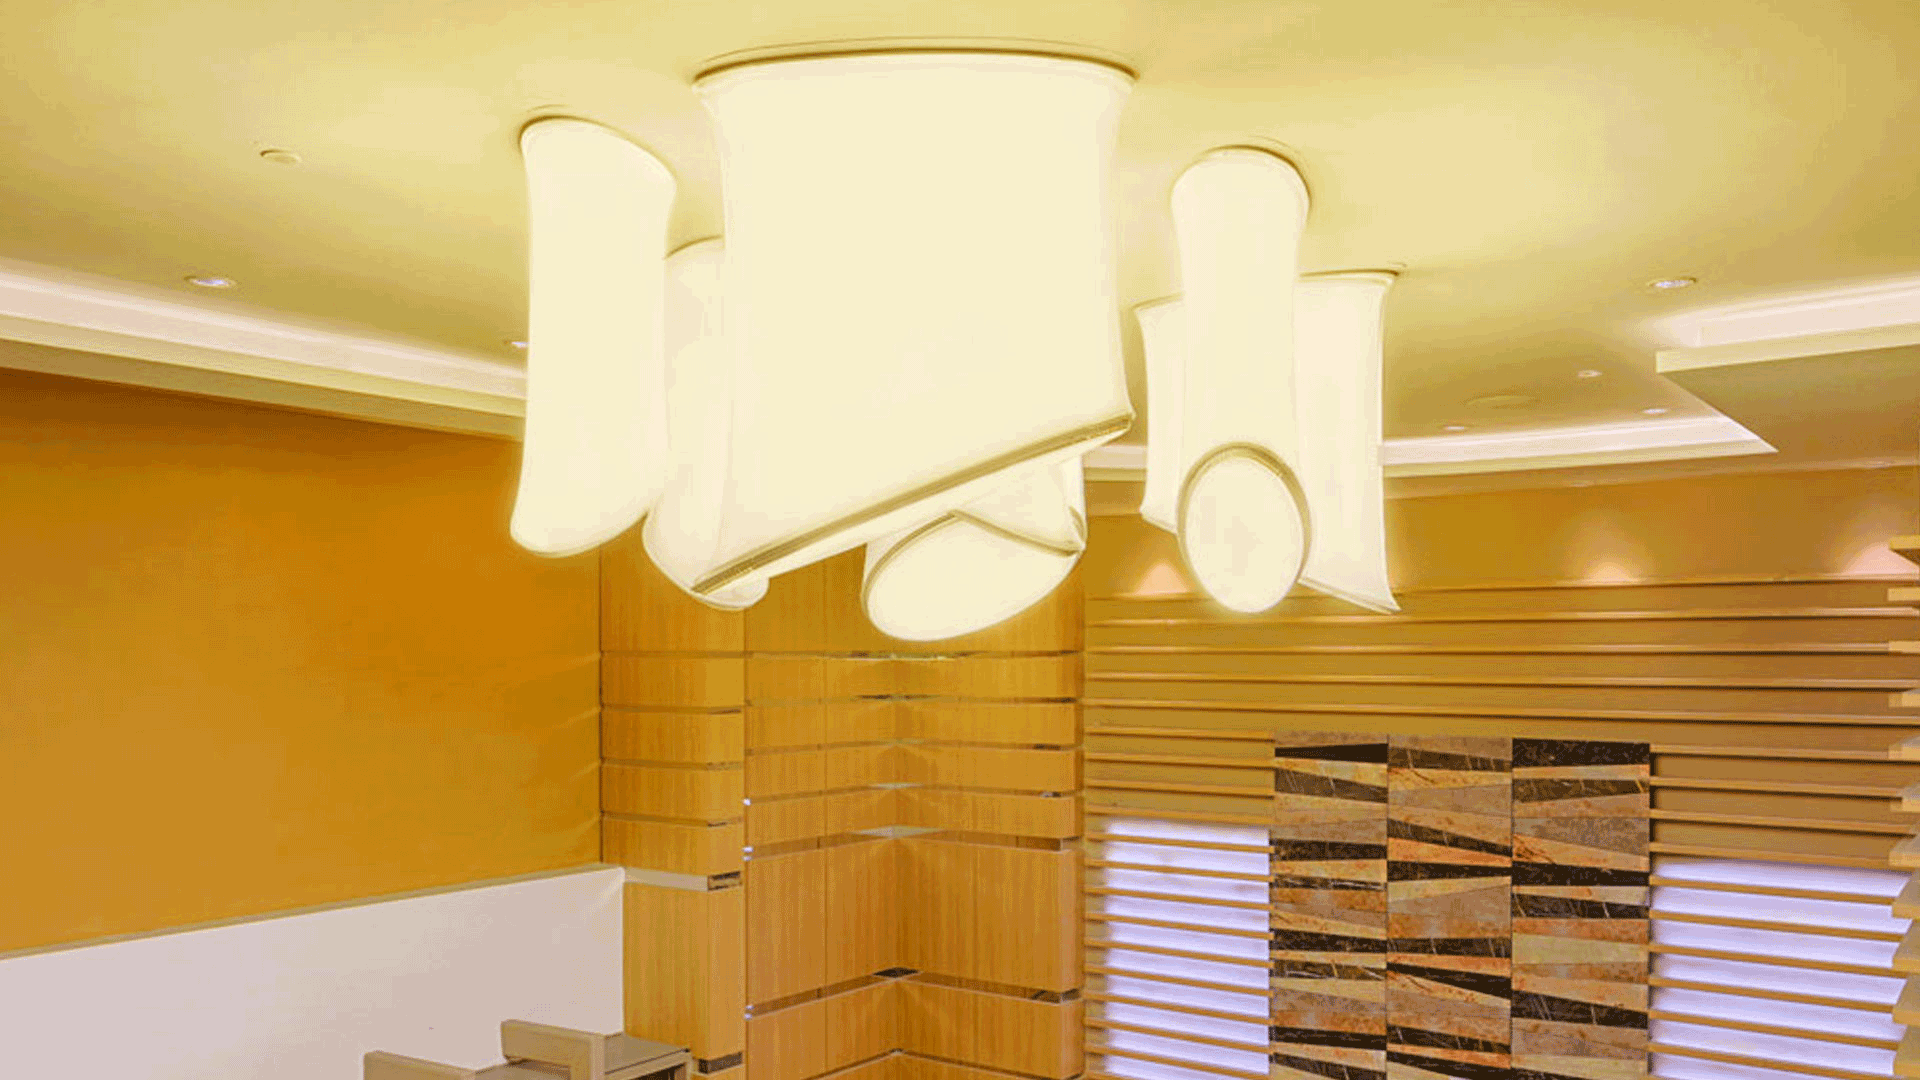 Holiday Inn - 3d Stretch ceiling translucent with backlighting in retail